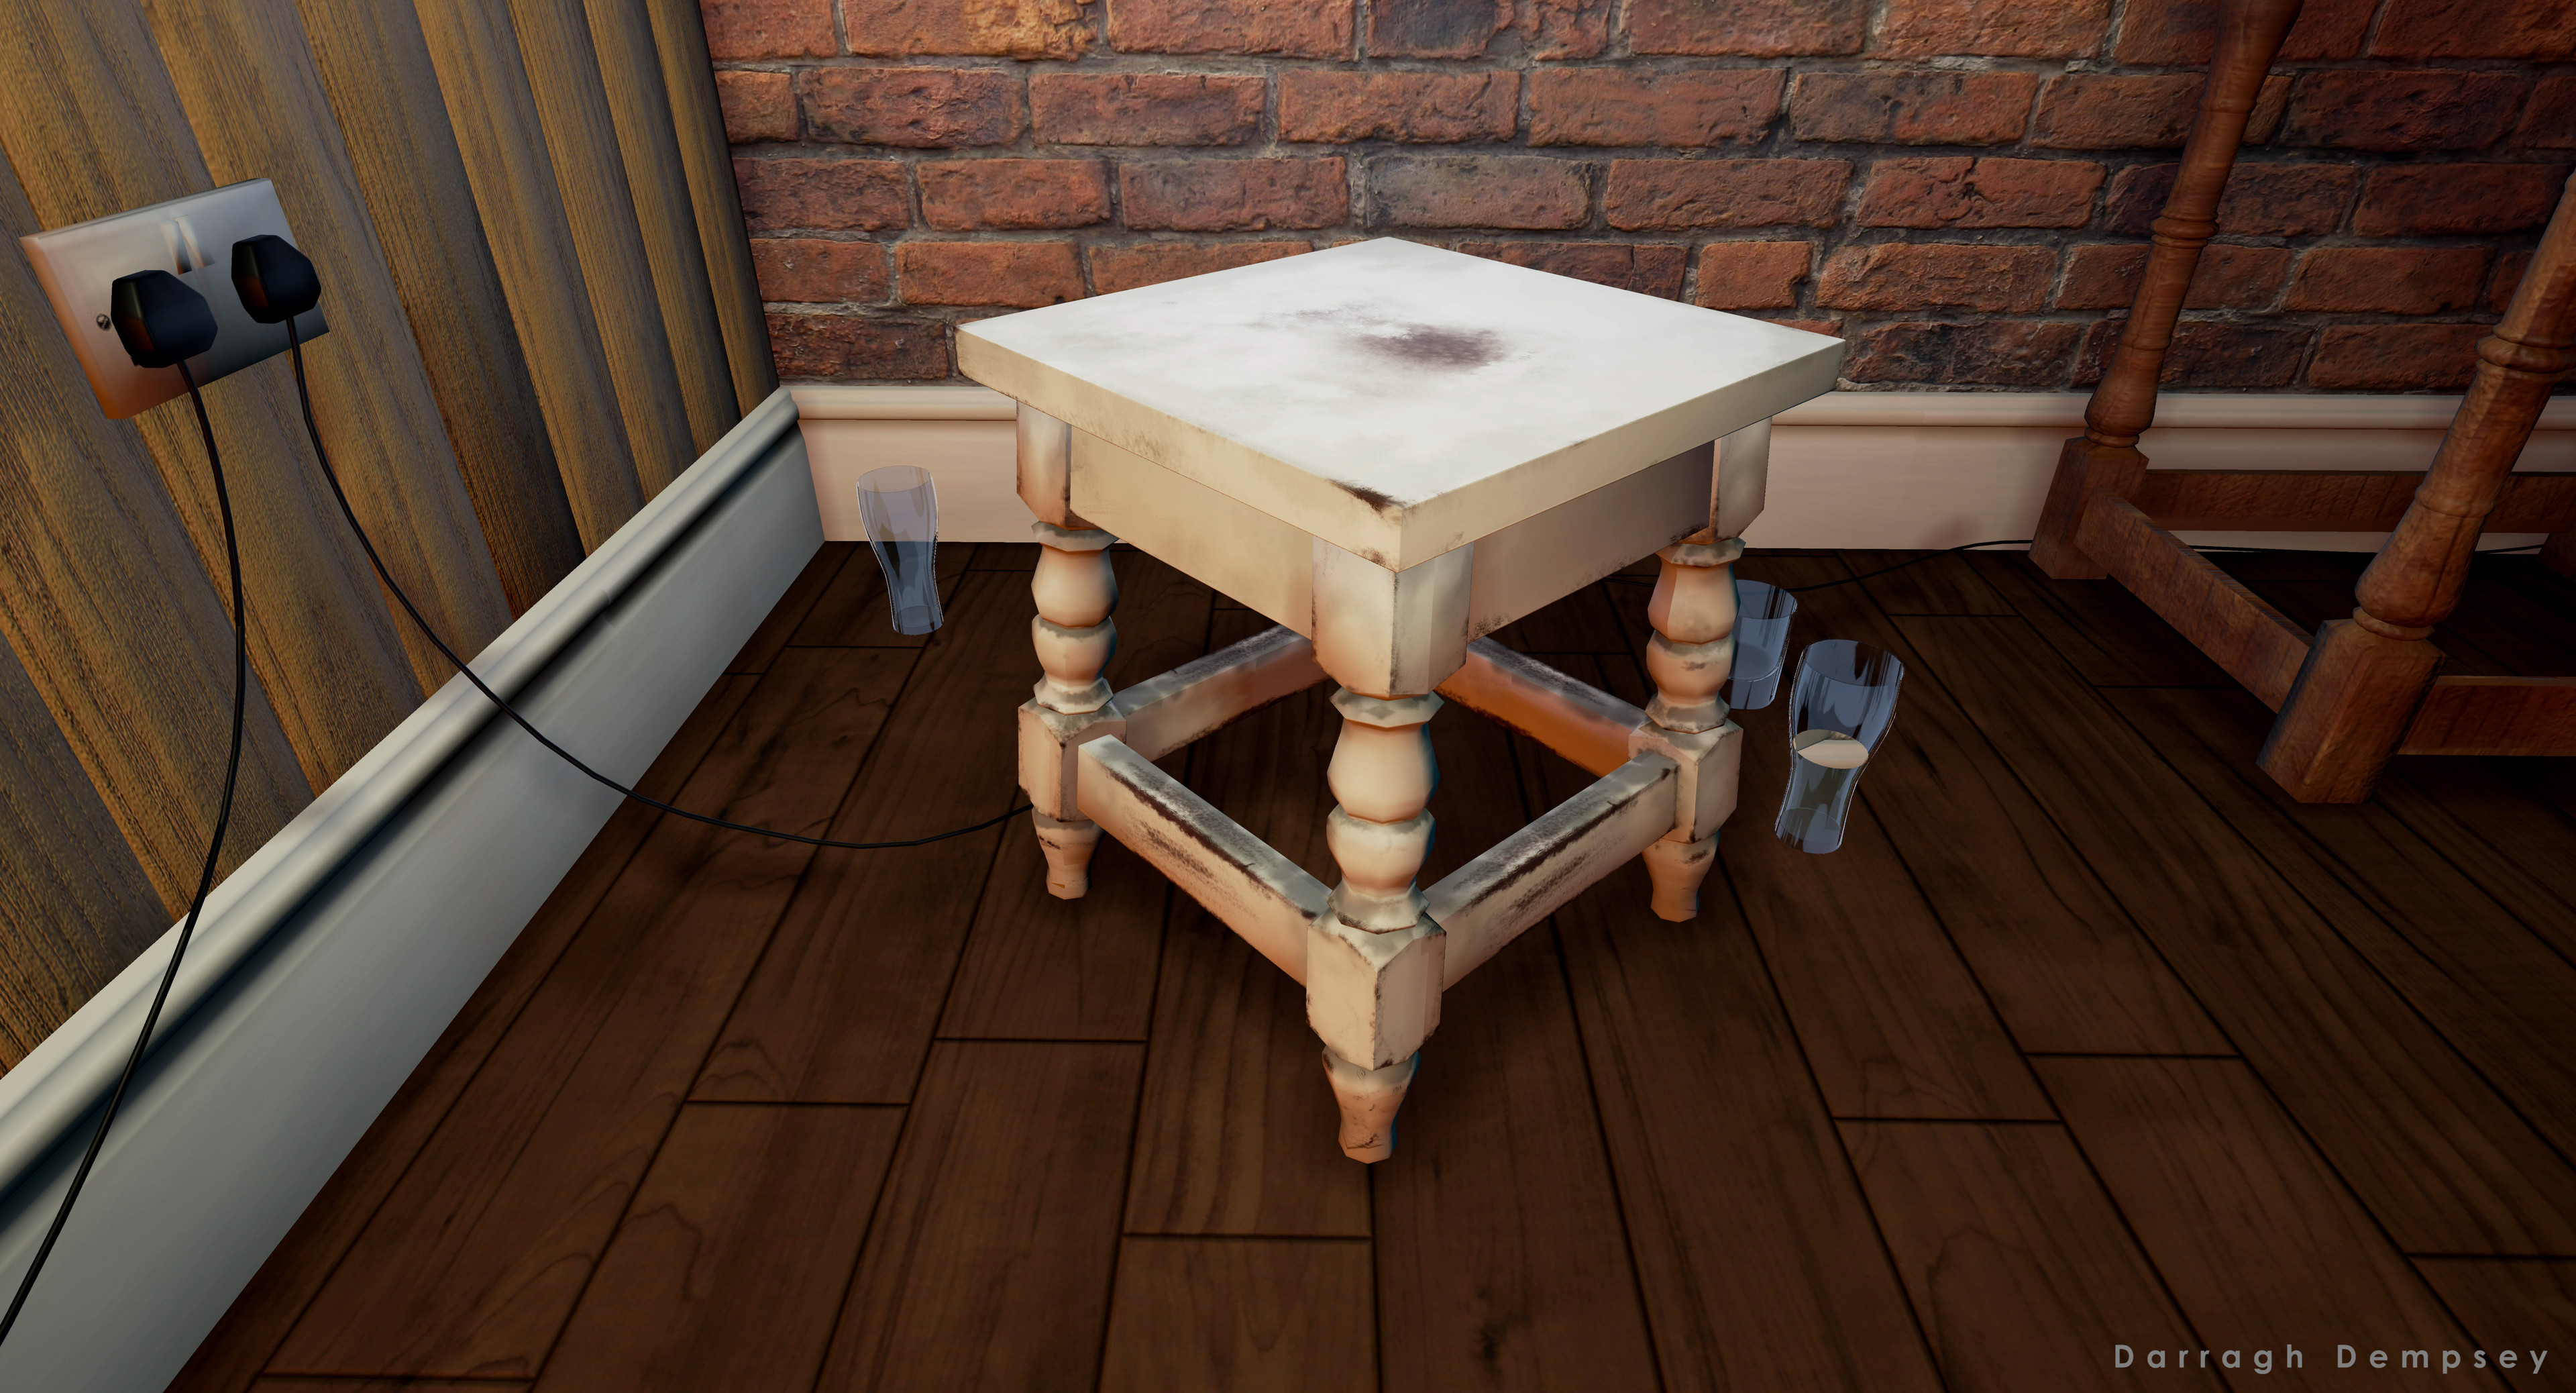 Stool modeled to the exact size of the original. This is the seat that the viewer sits on both inside and outside of the virtual environment. Unreal Engine screenshot.